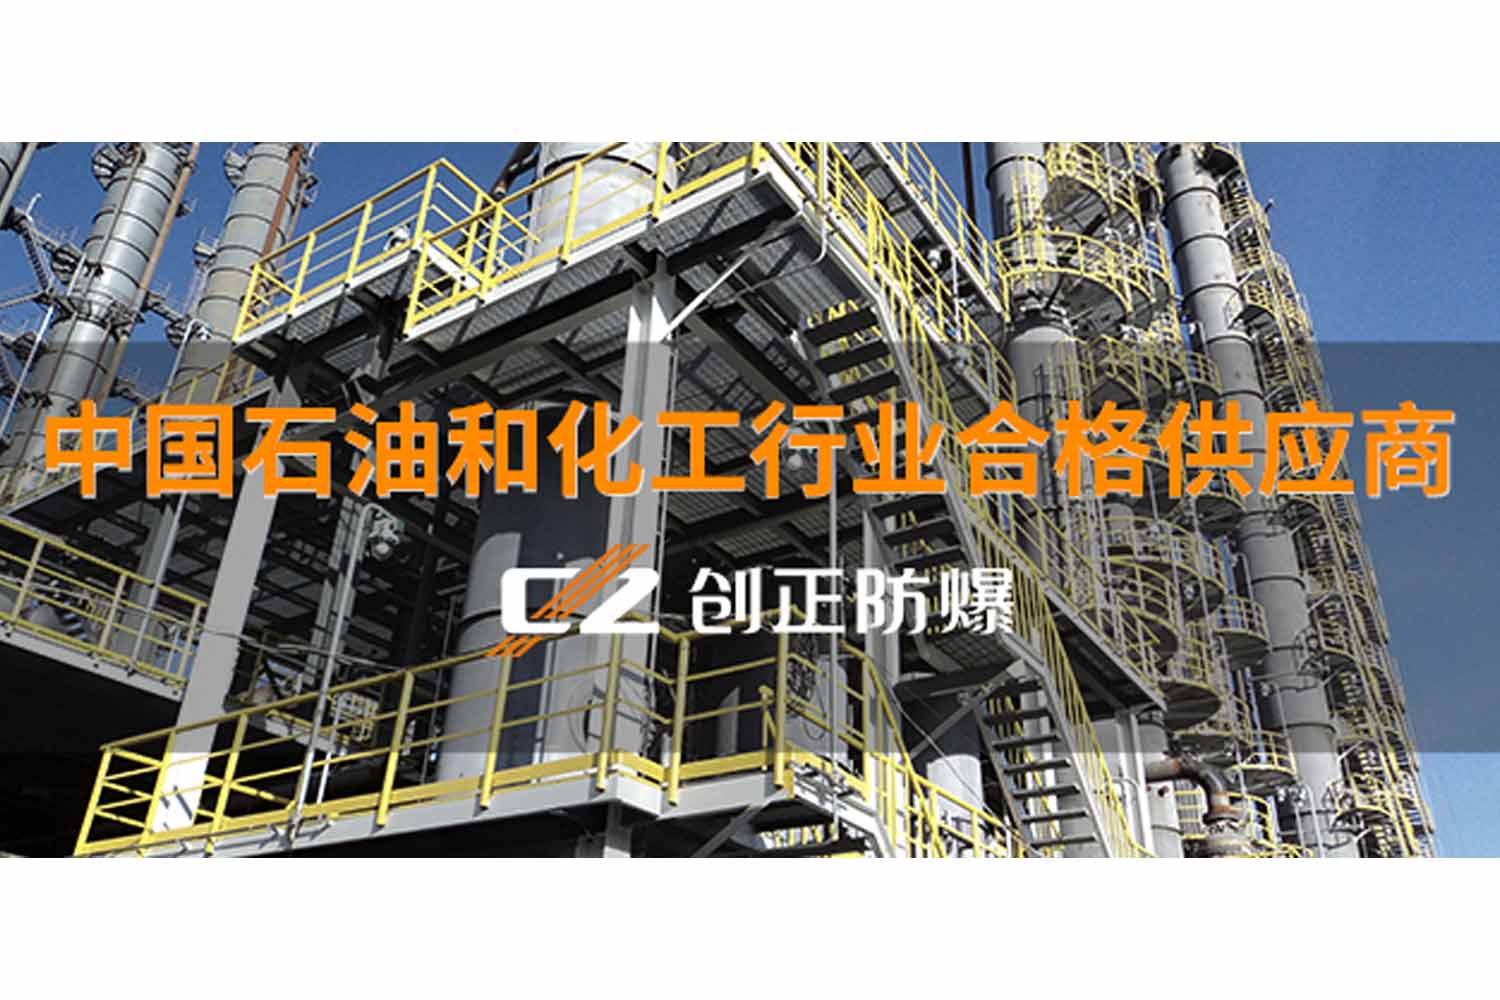 CZ passed the review of qualified suppliers in China's petroleum and chemical industry